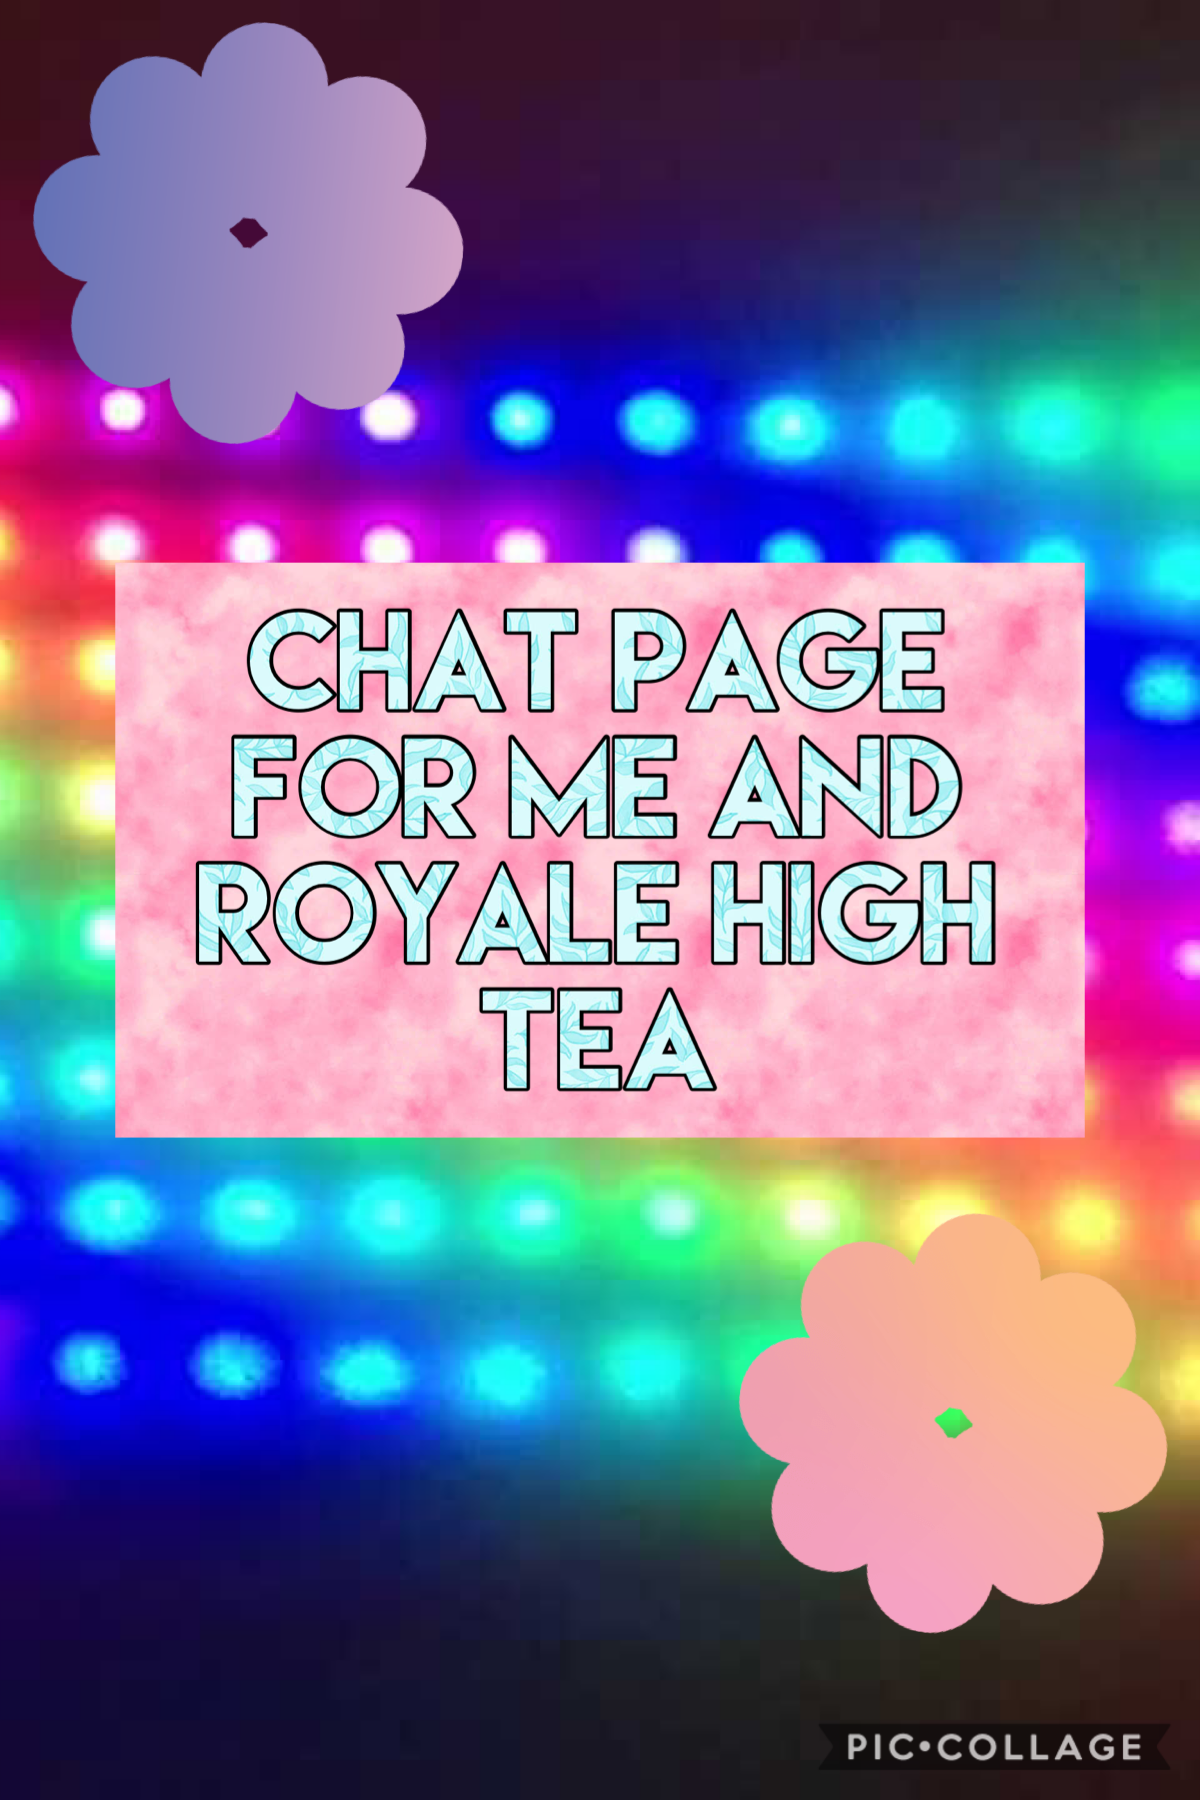 Chat page for me and royale high tea